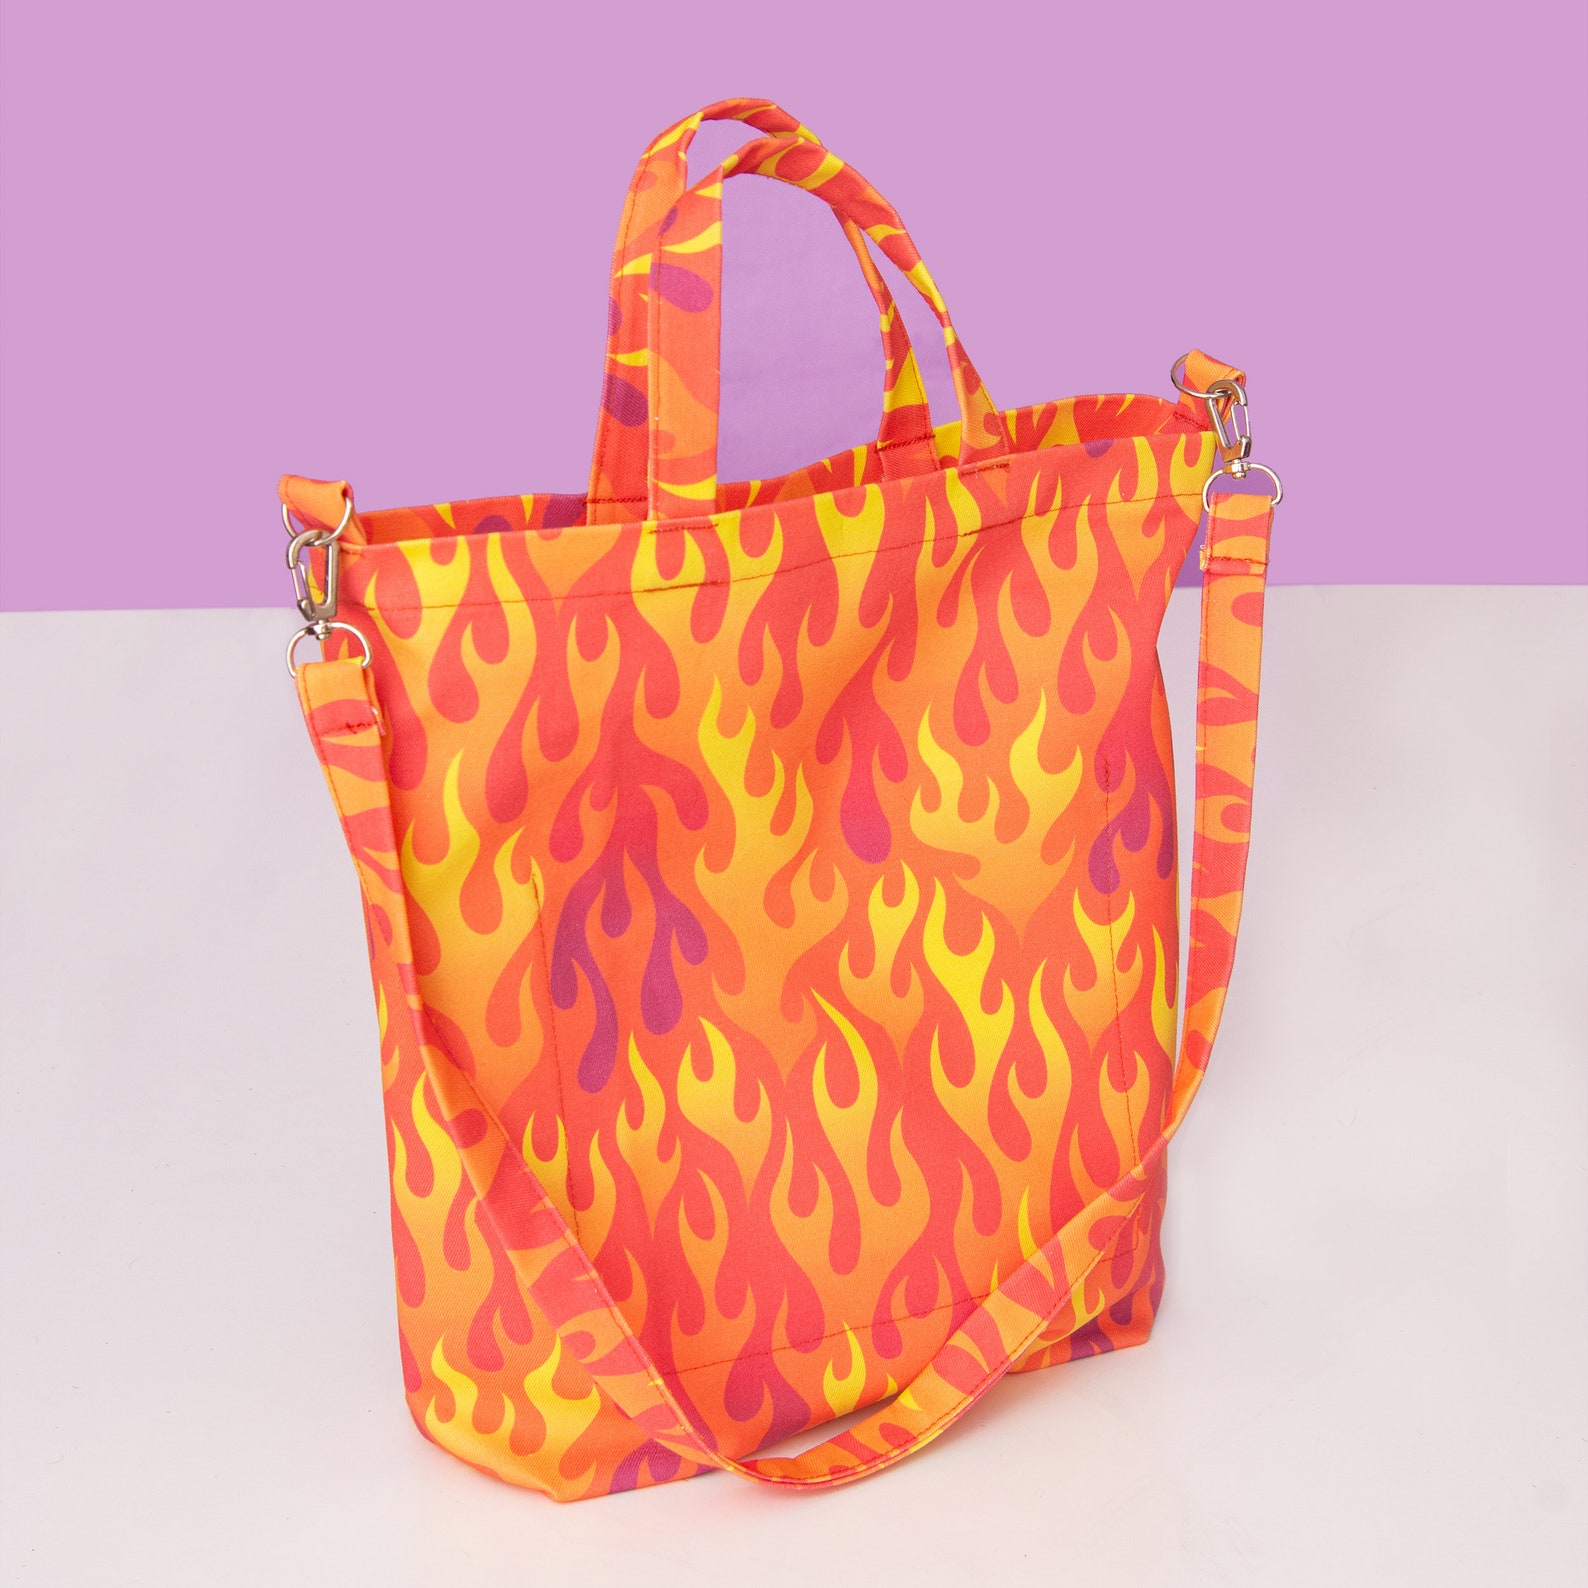 Flames Tote Bag / Fire Tote / Red and Orange tote / Cotton | Etsy